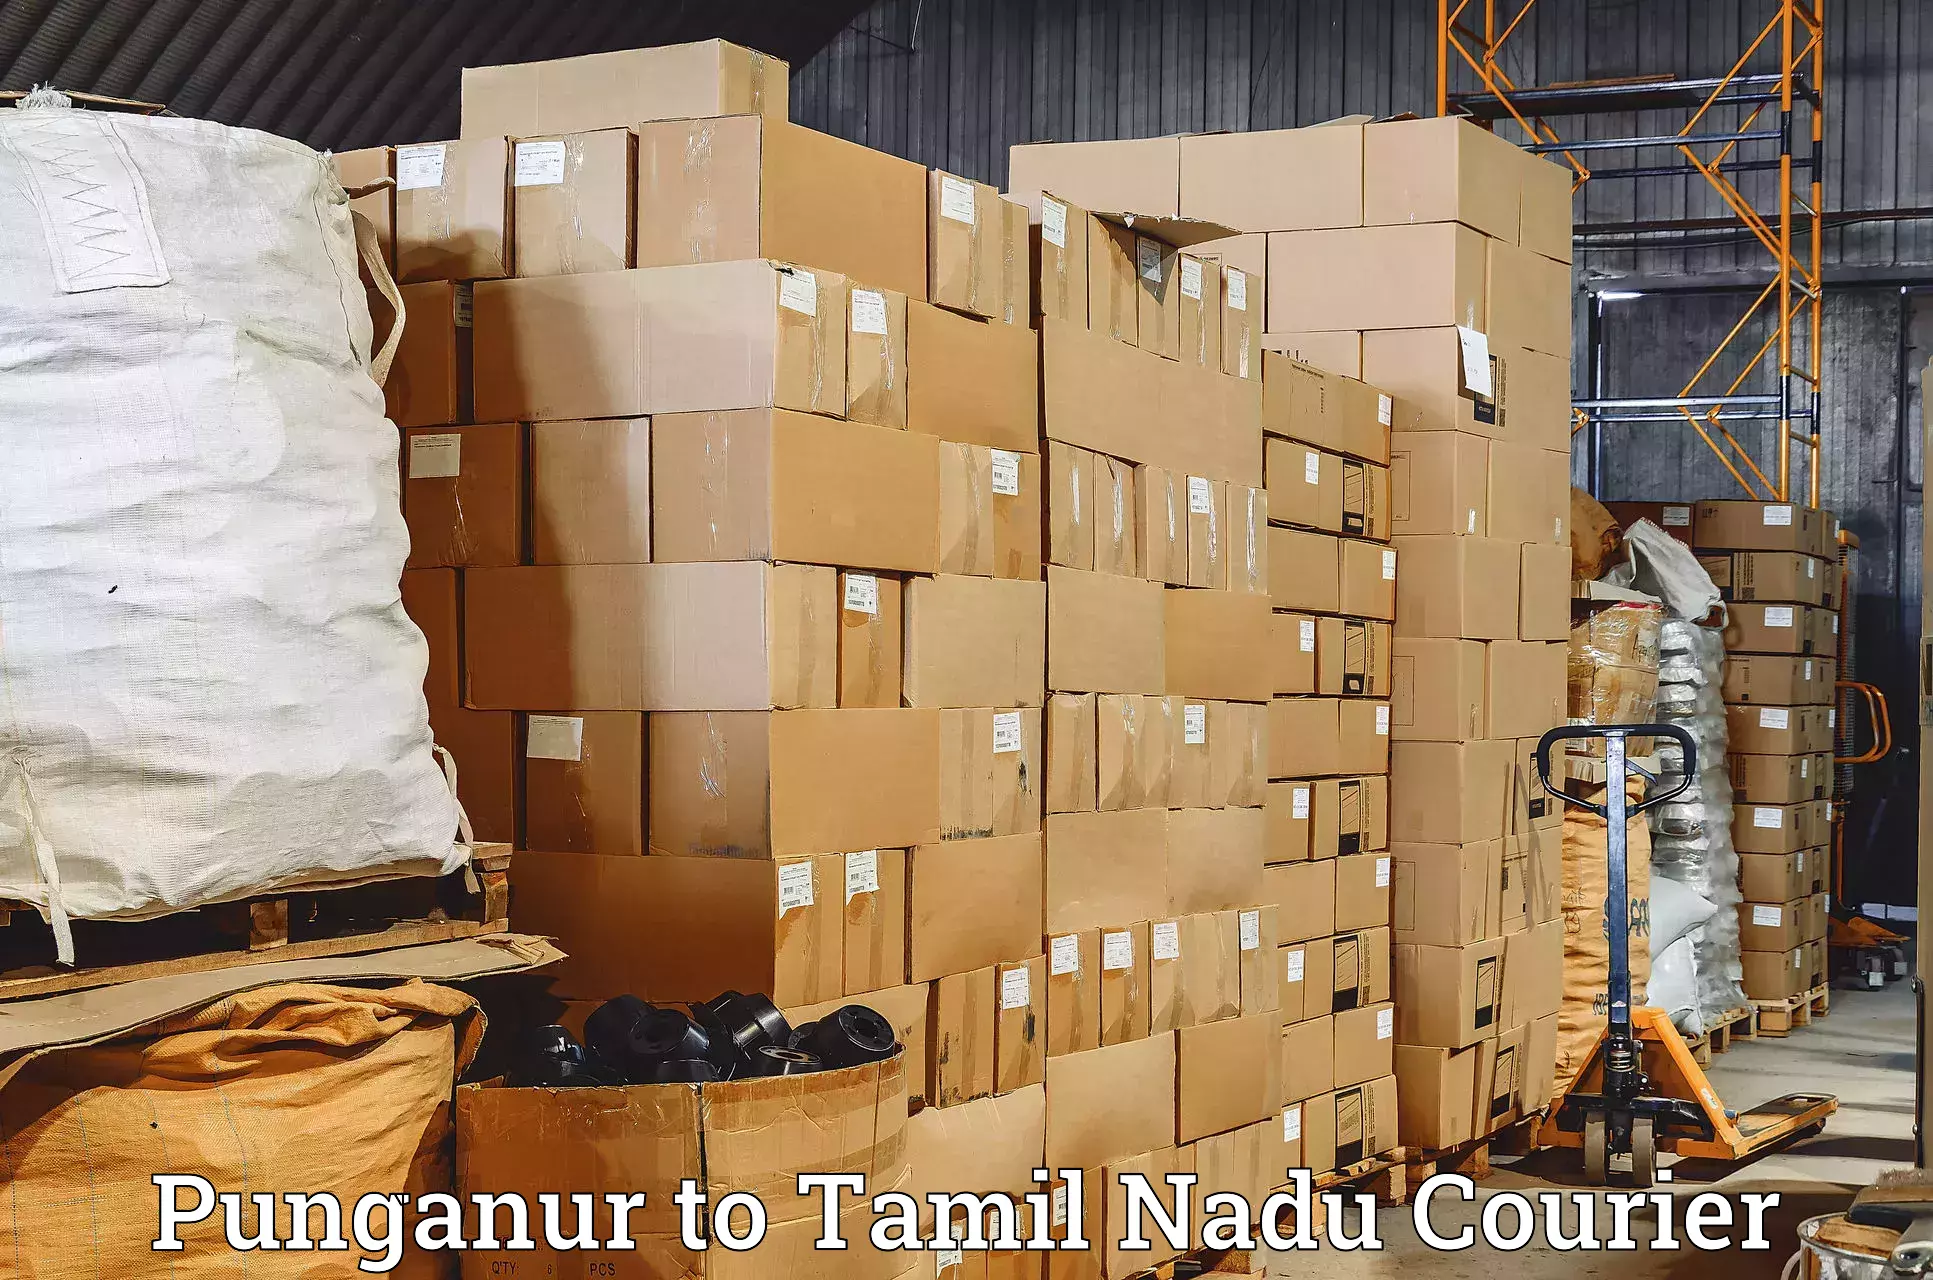 Parcel handling and care Punganur to Coonoor